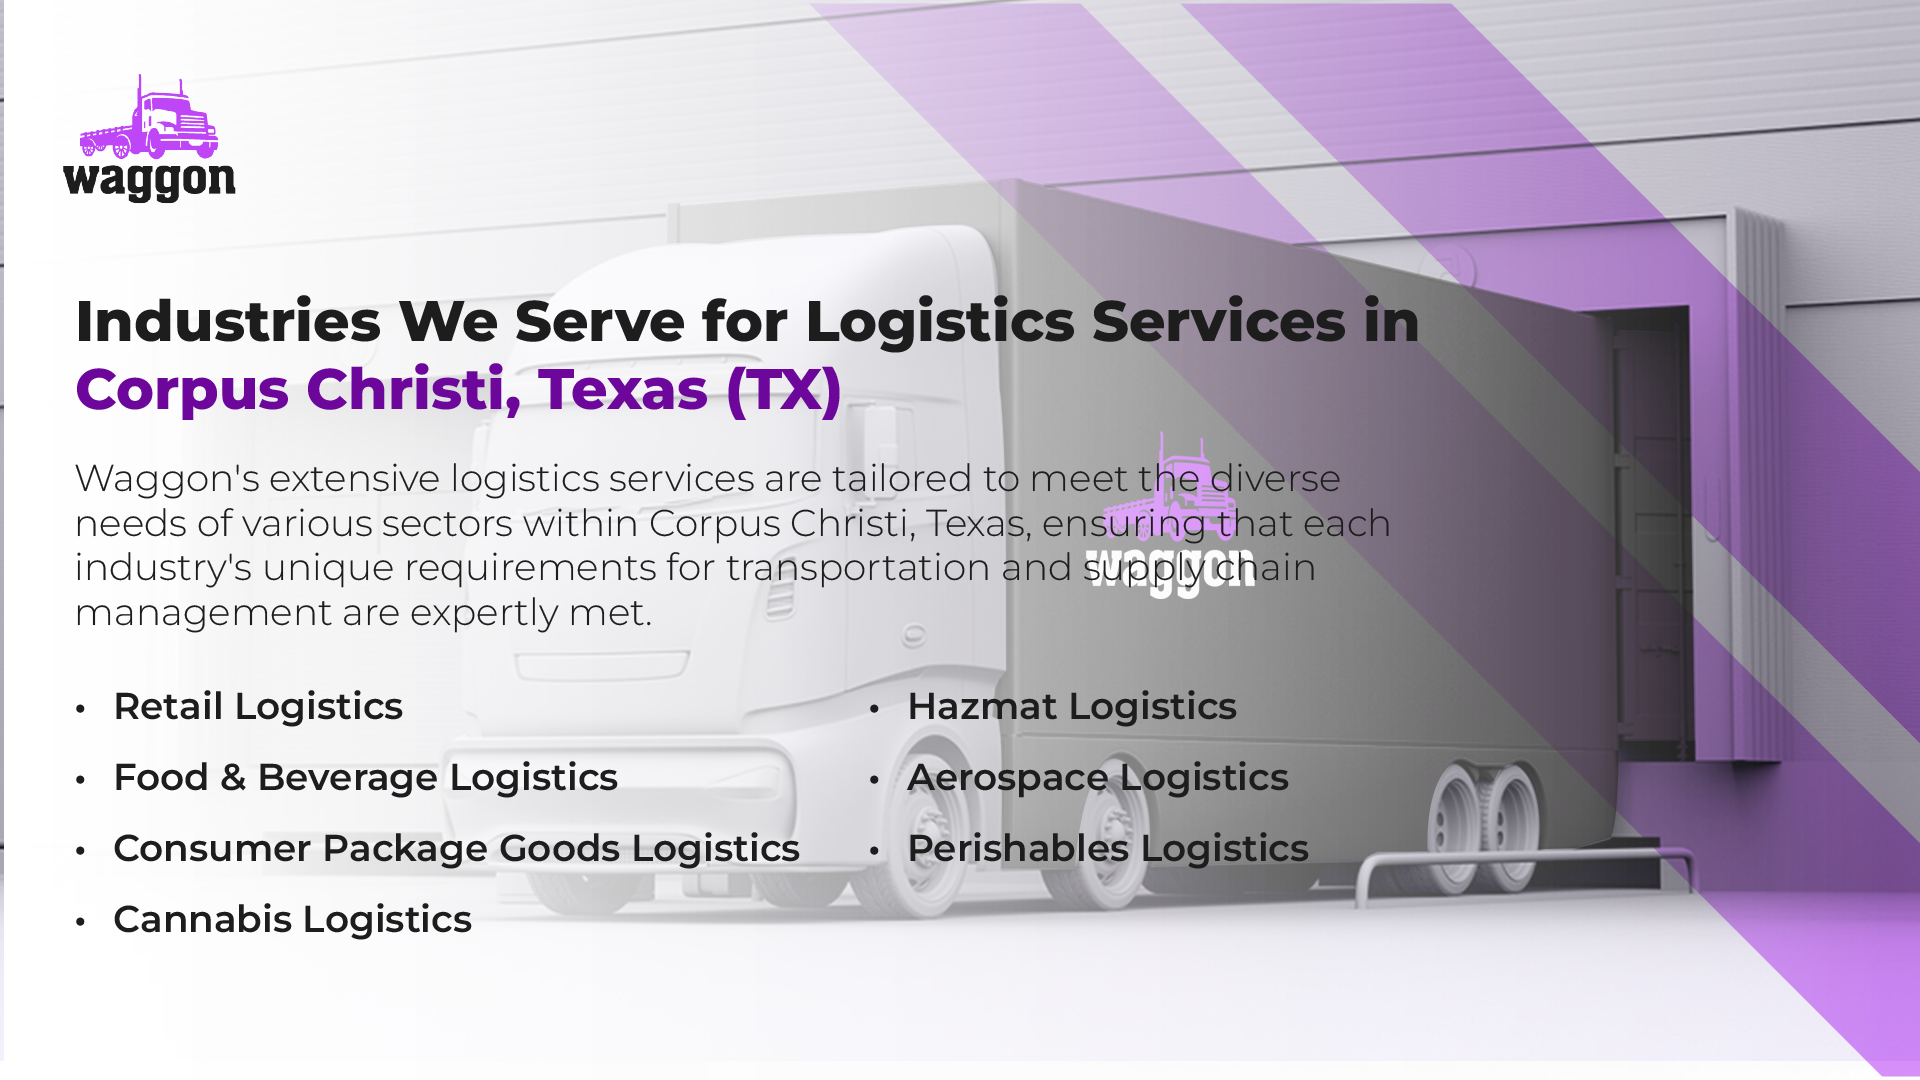 Industries We Serve for Logistics Services in Corpus Christi, Texas (TX)